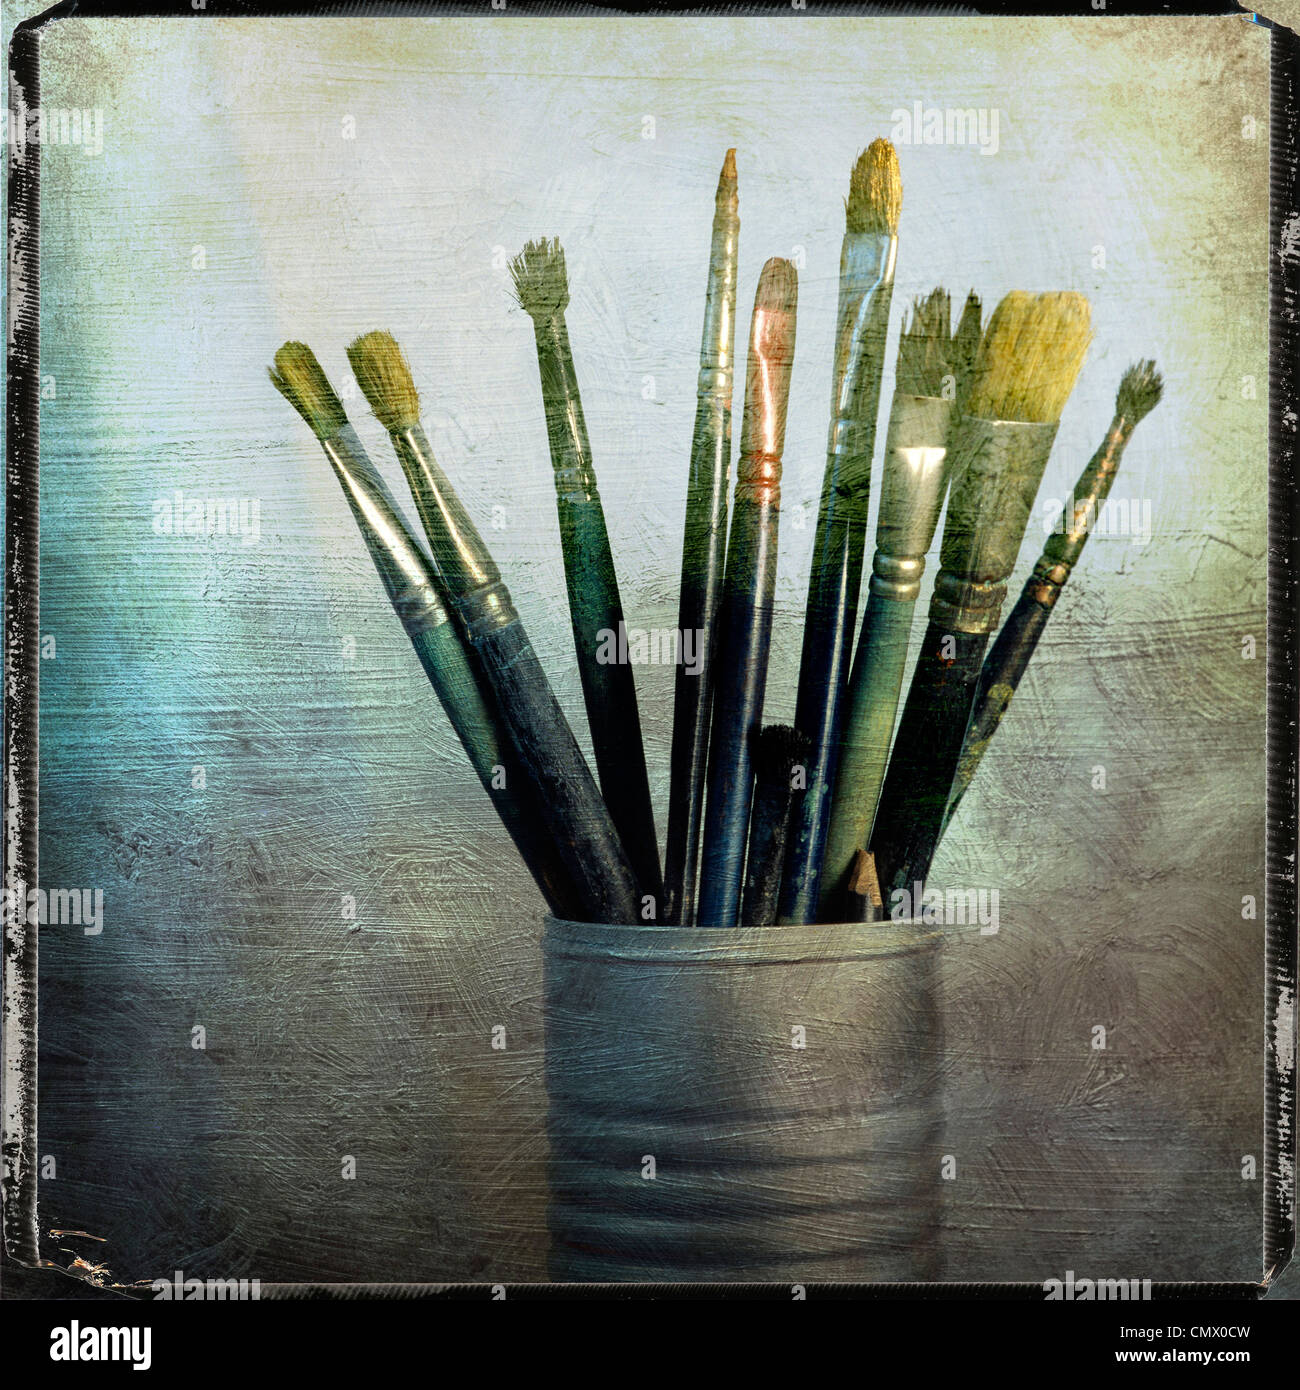 Old Paints Artists Paintbrushes Paints And Brushes Background Stock Photo,  Picture and Royalty Free Image. Image 32714159.